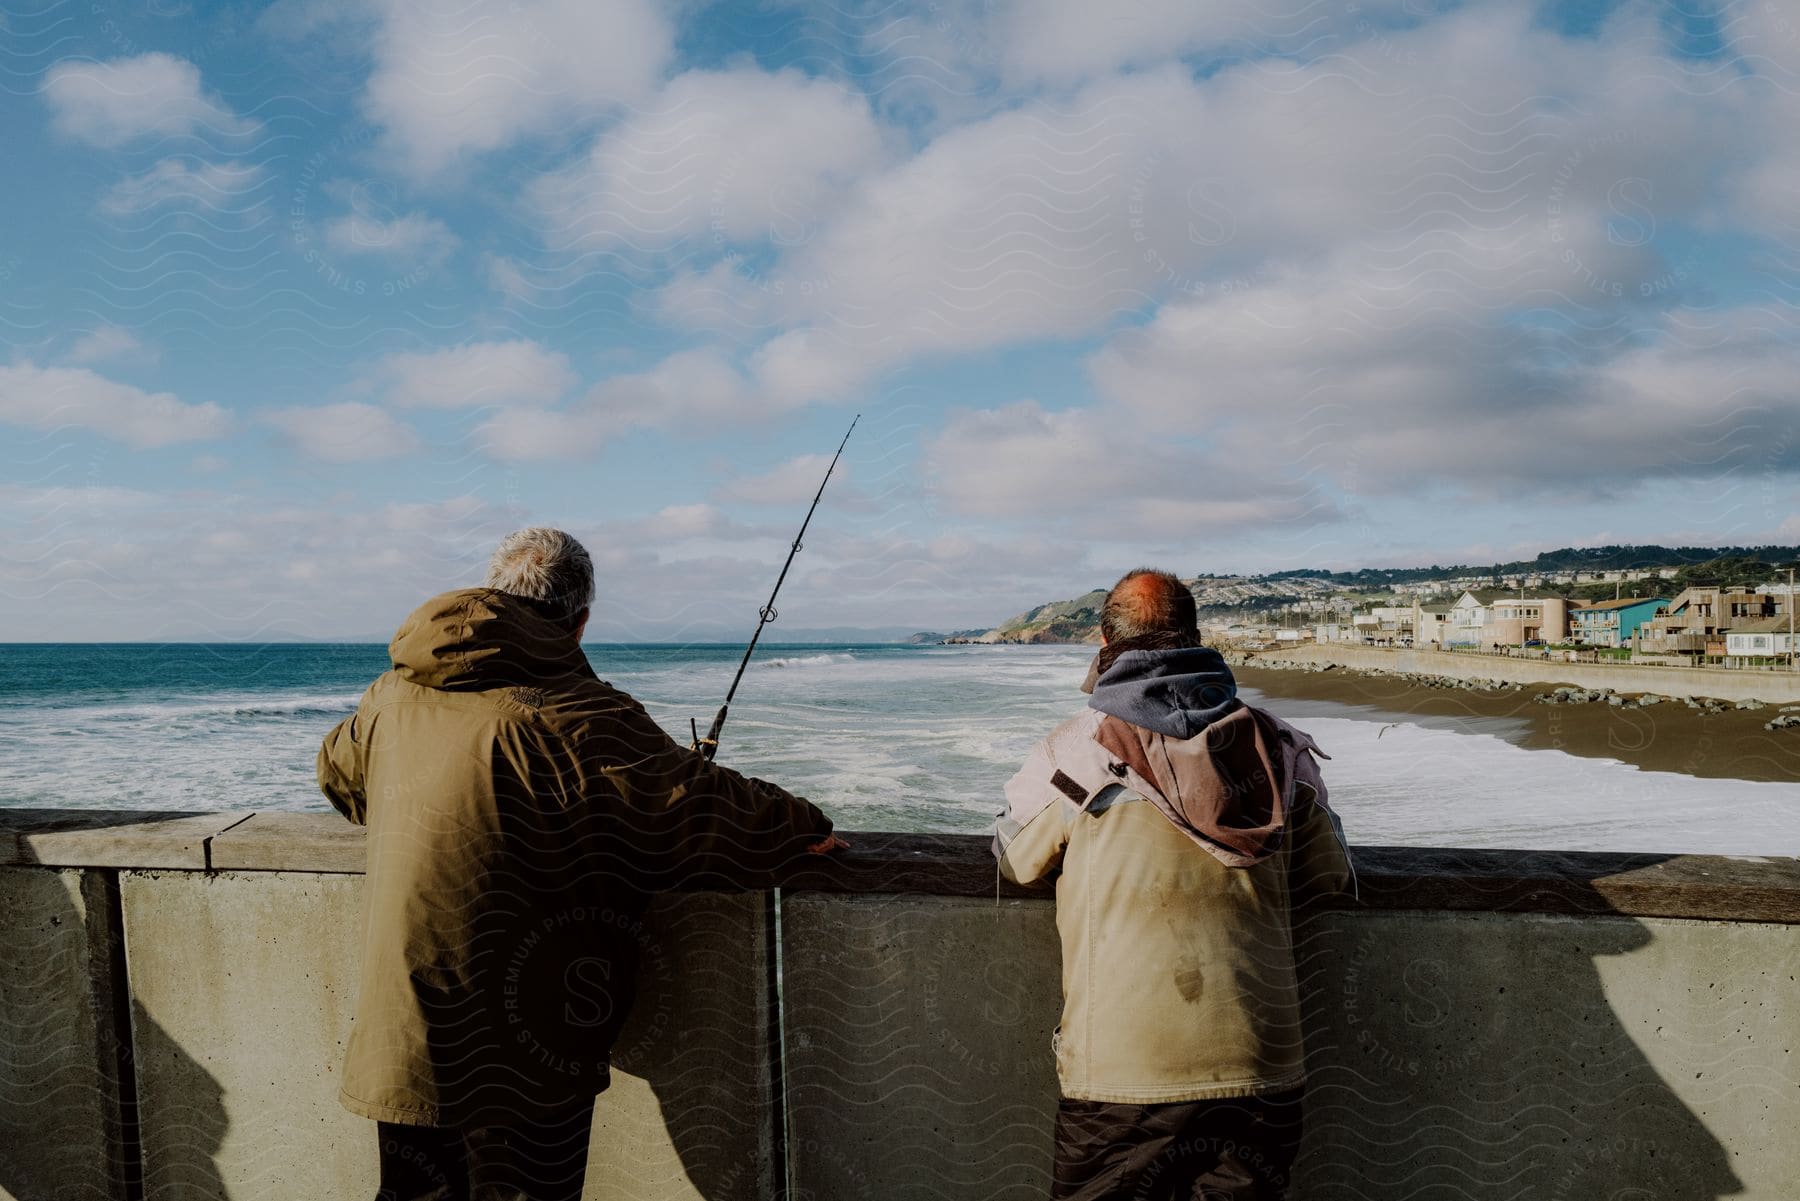 Two people with their backs turned, standing by the sea. They seem to be fishing or simply enjoying the coastal scenery.